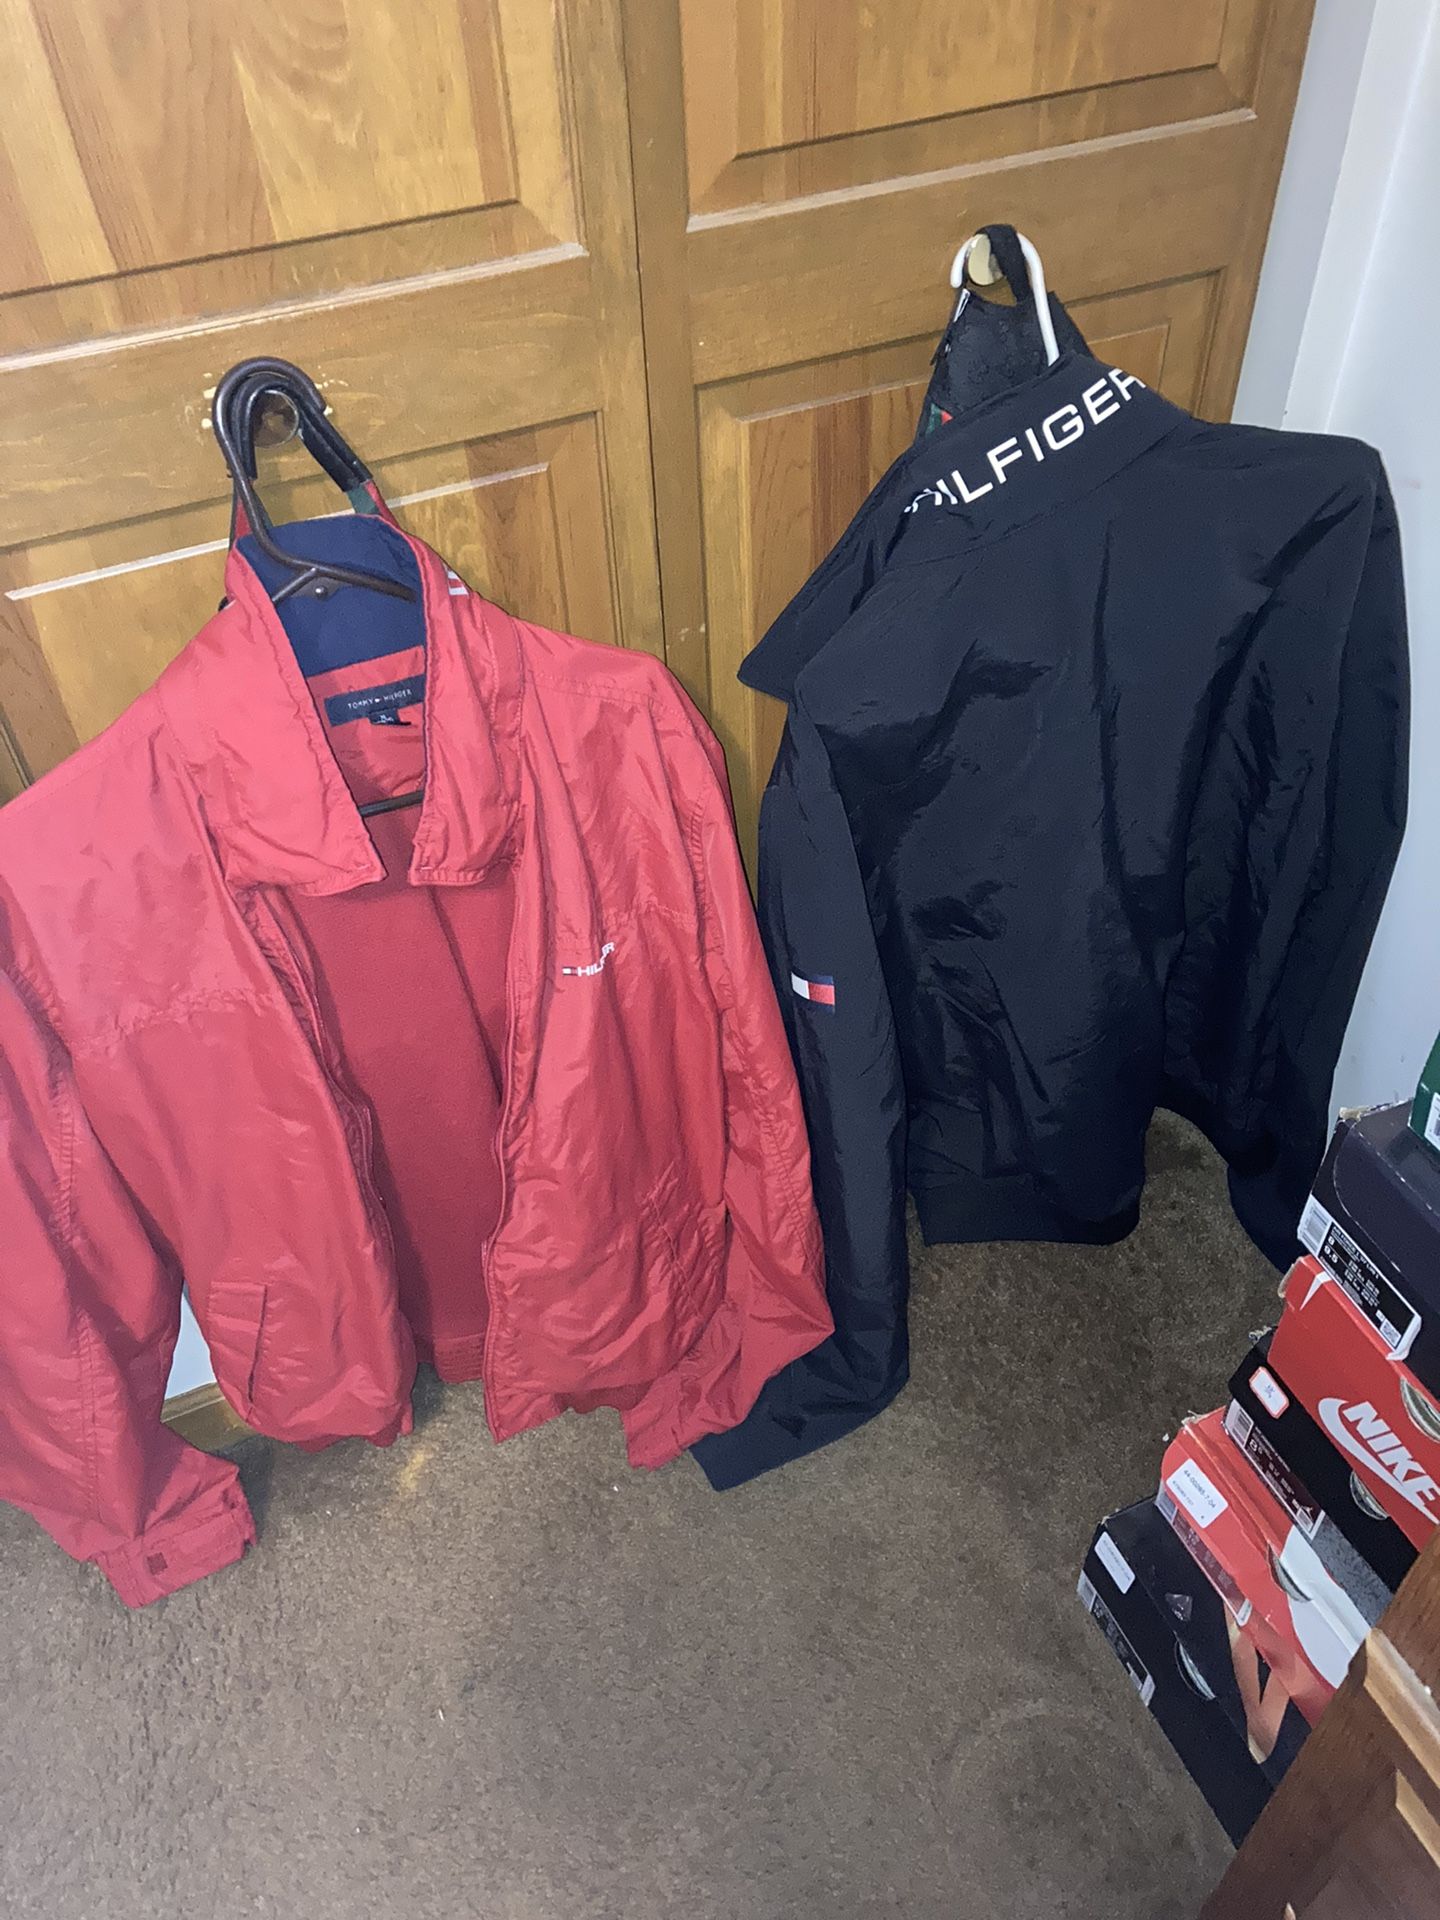 2 Tommy Hilfiger Jackets Great Condition